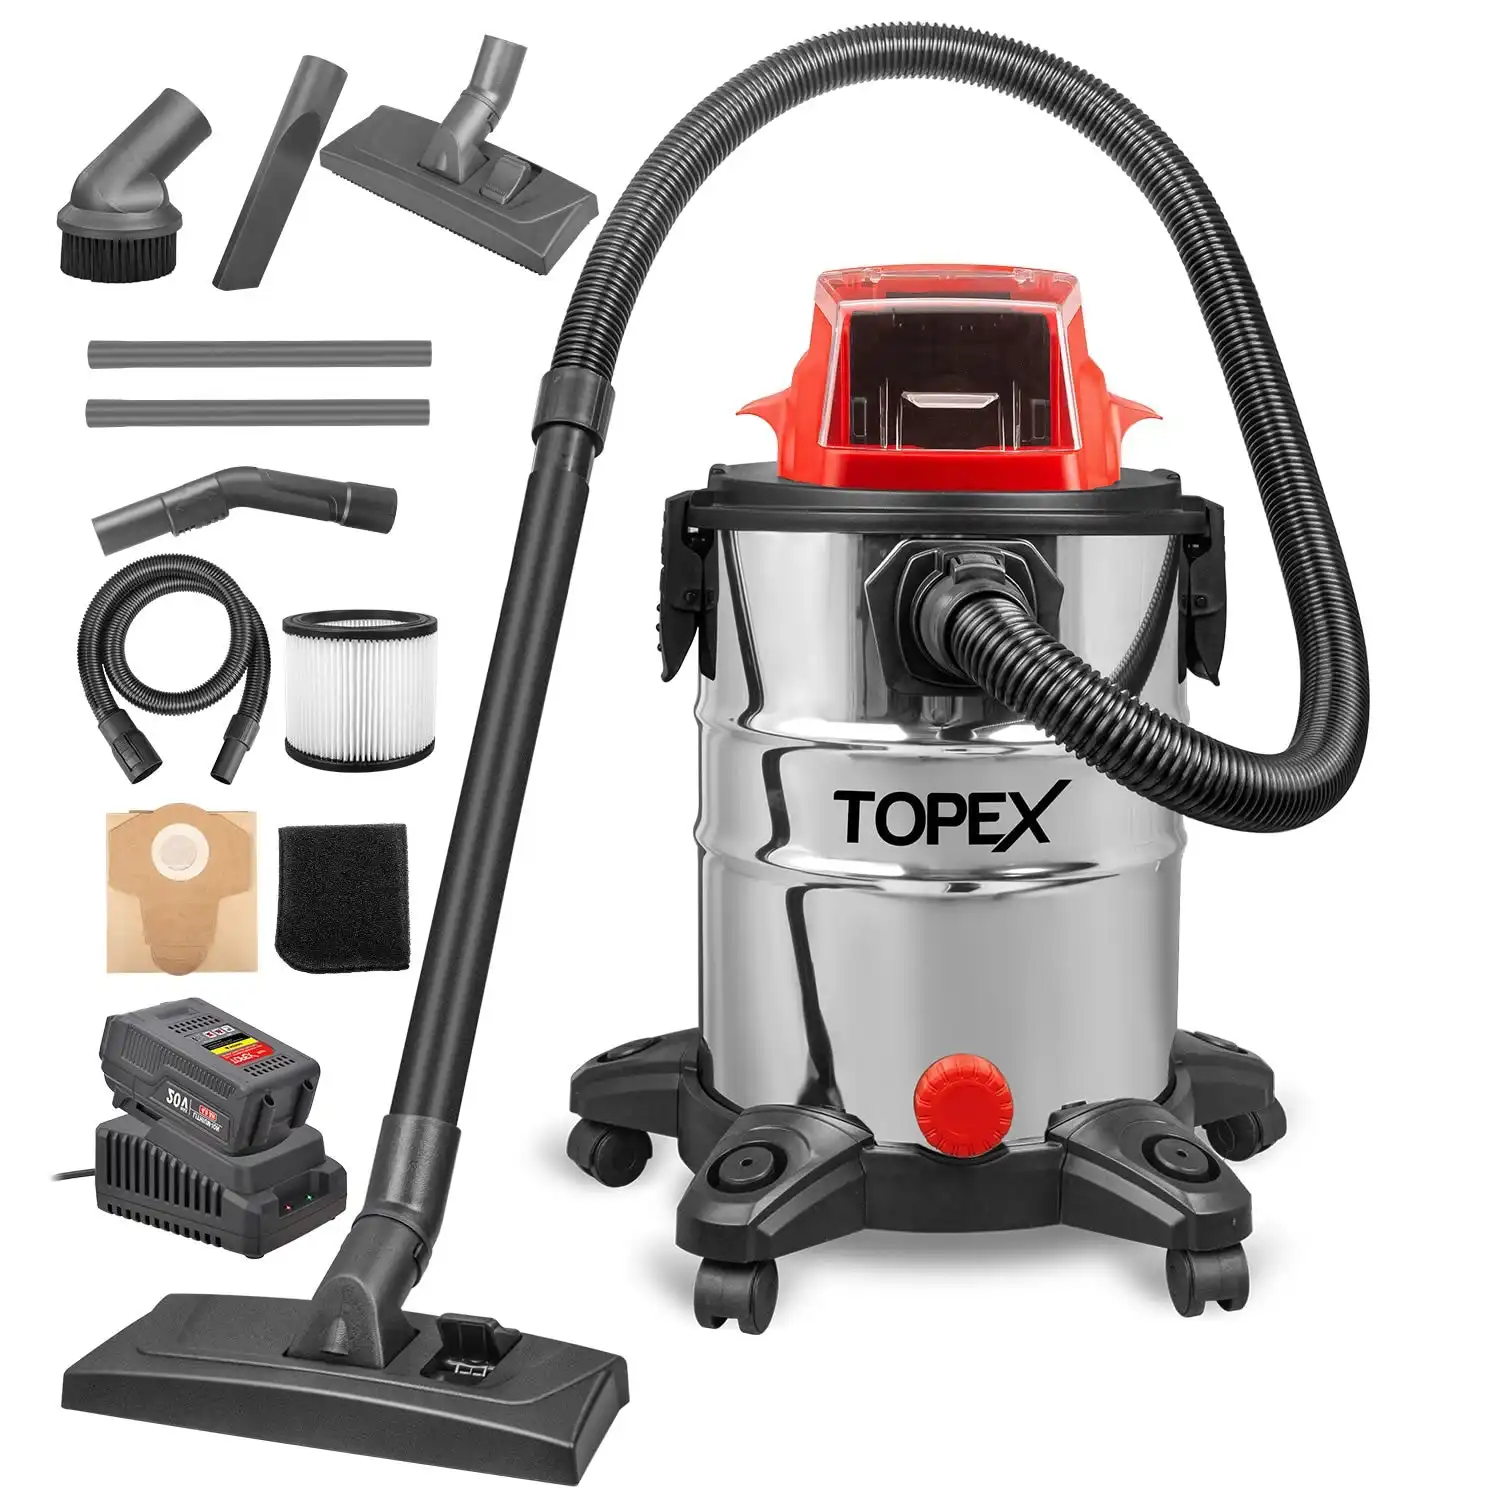 Topex 20V 25L Cordless Wet & Dry Vacuum Cleaner & Blower